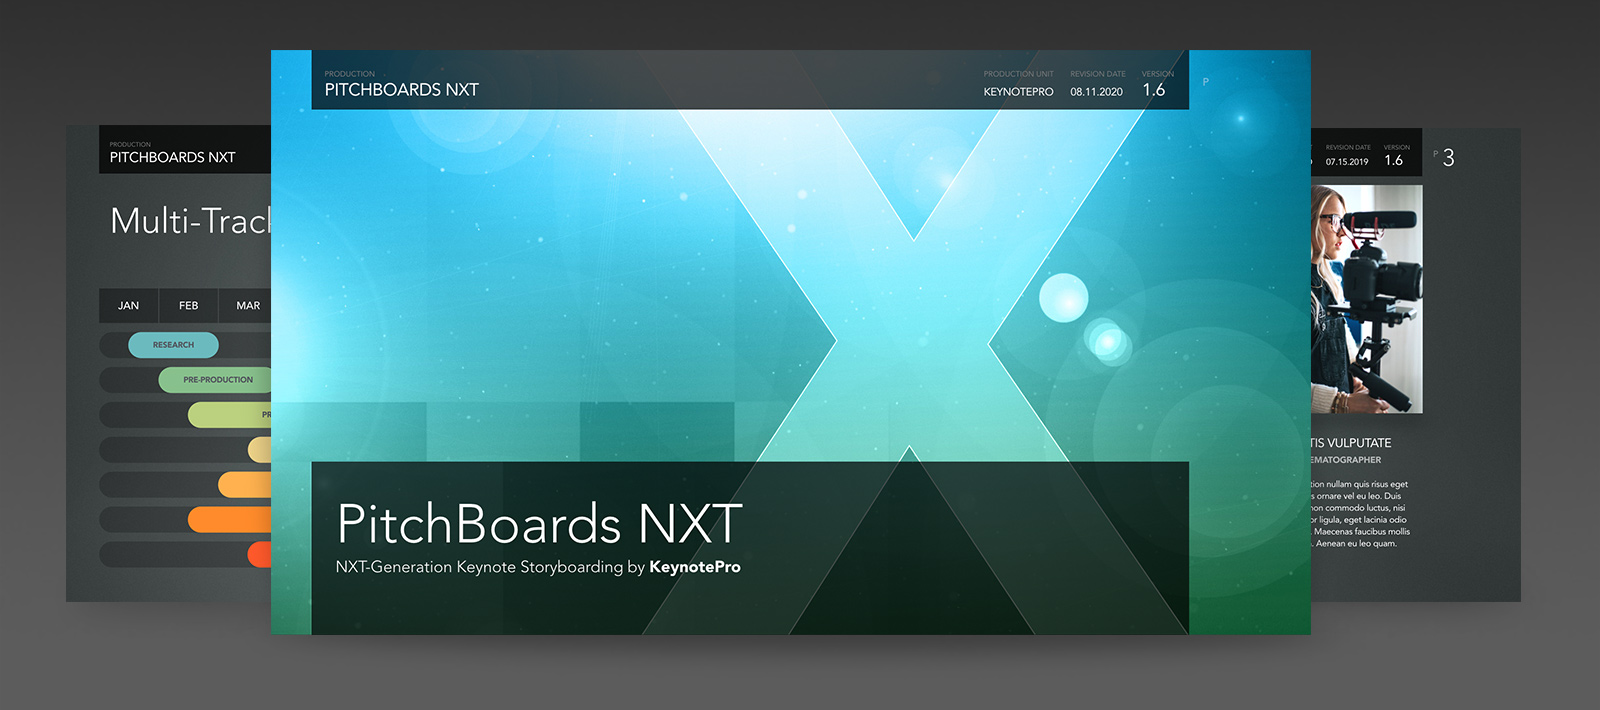 PitchBoards NXT v1.6 Preview